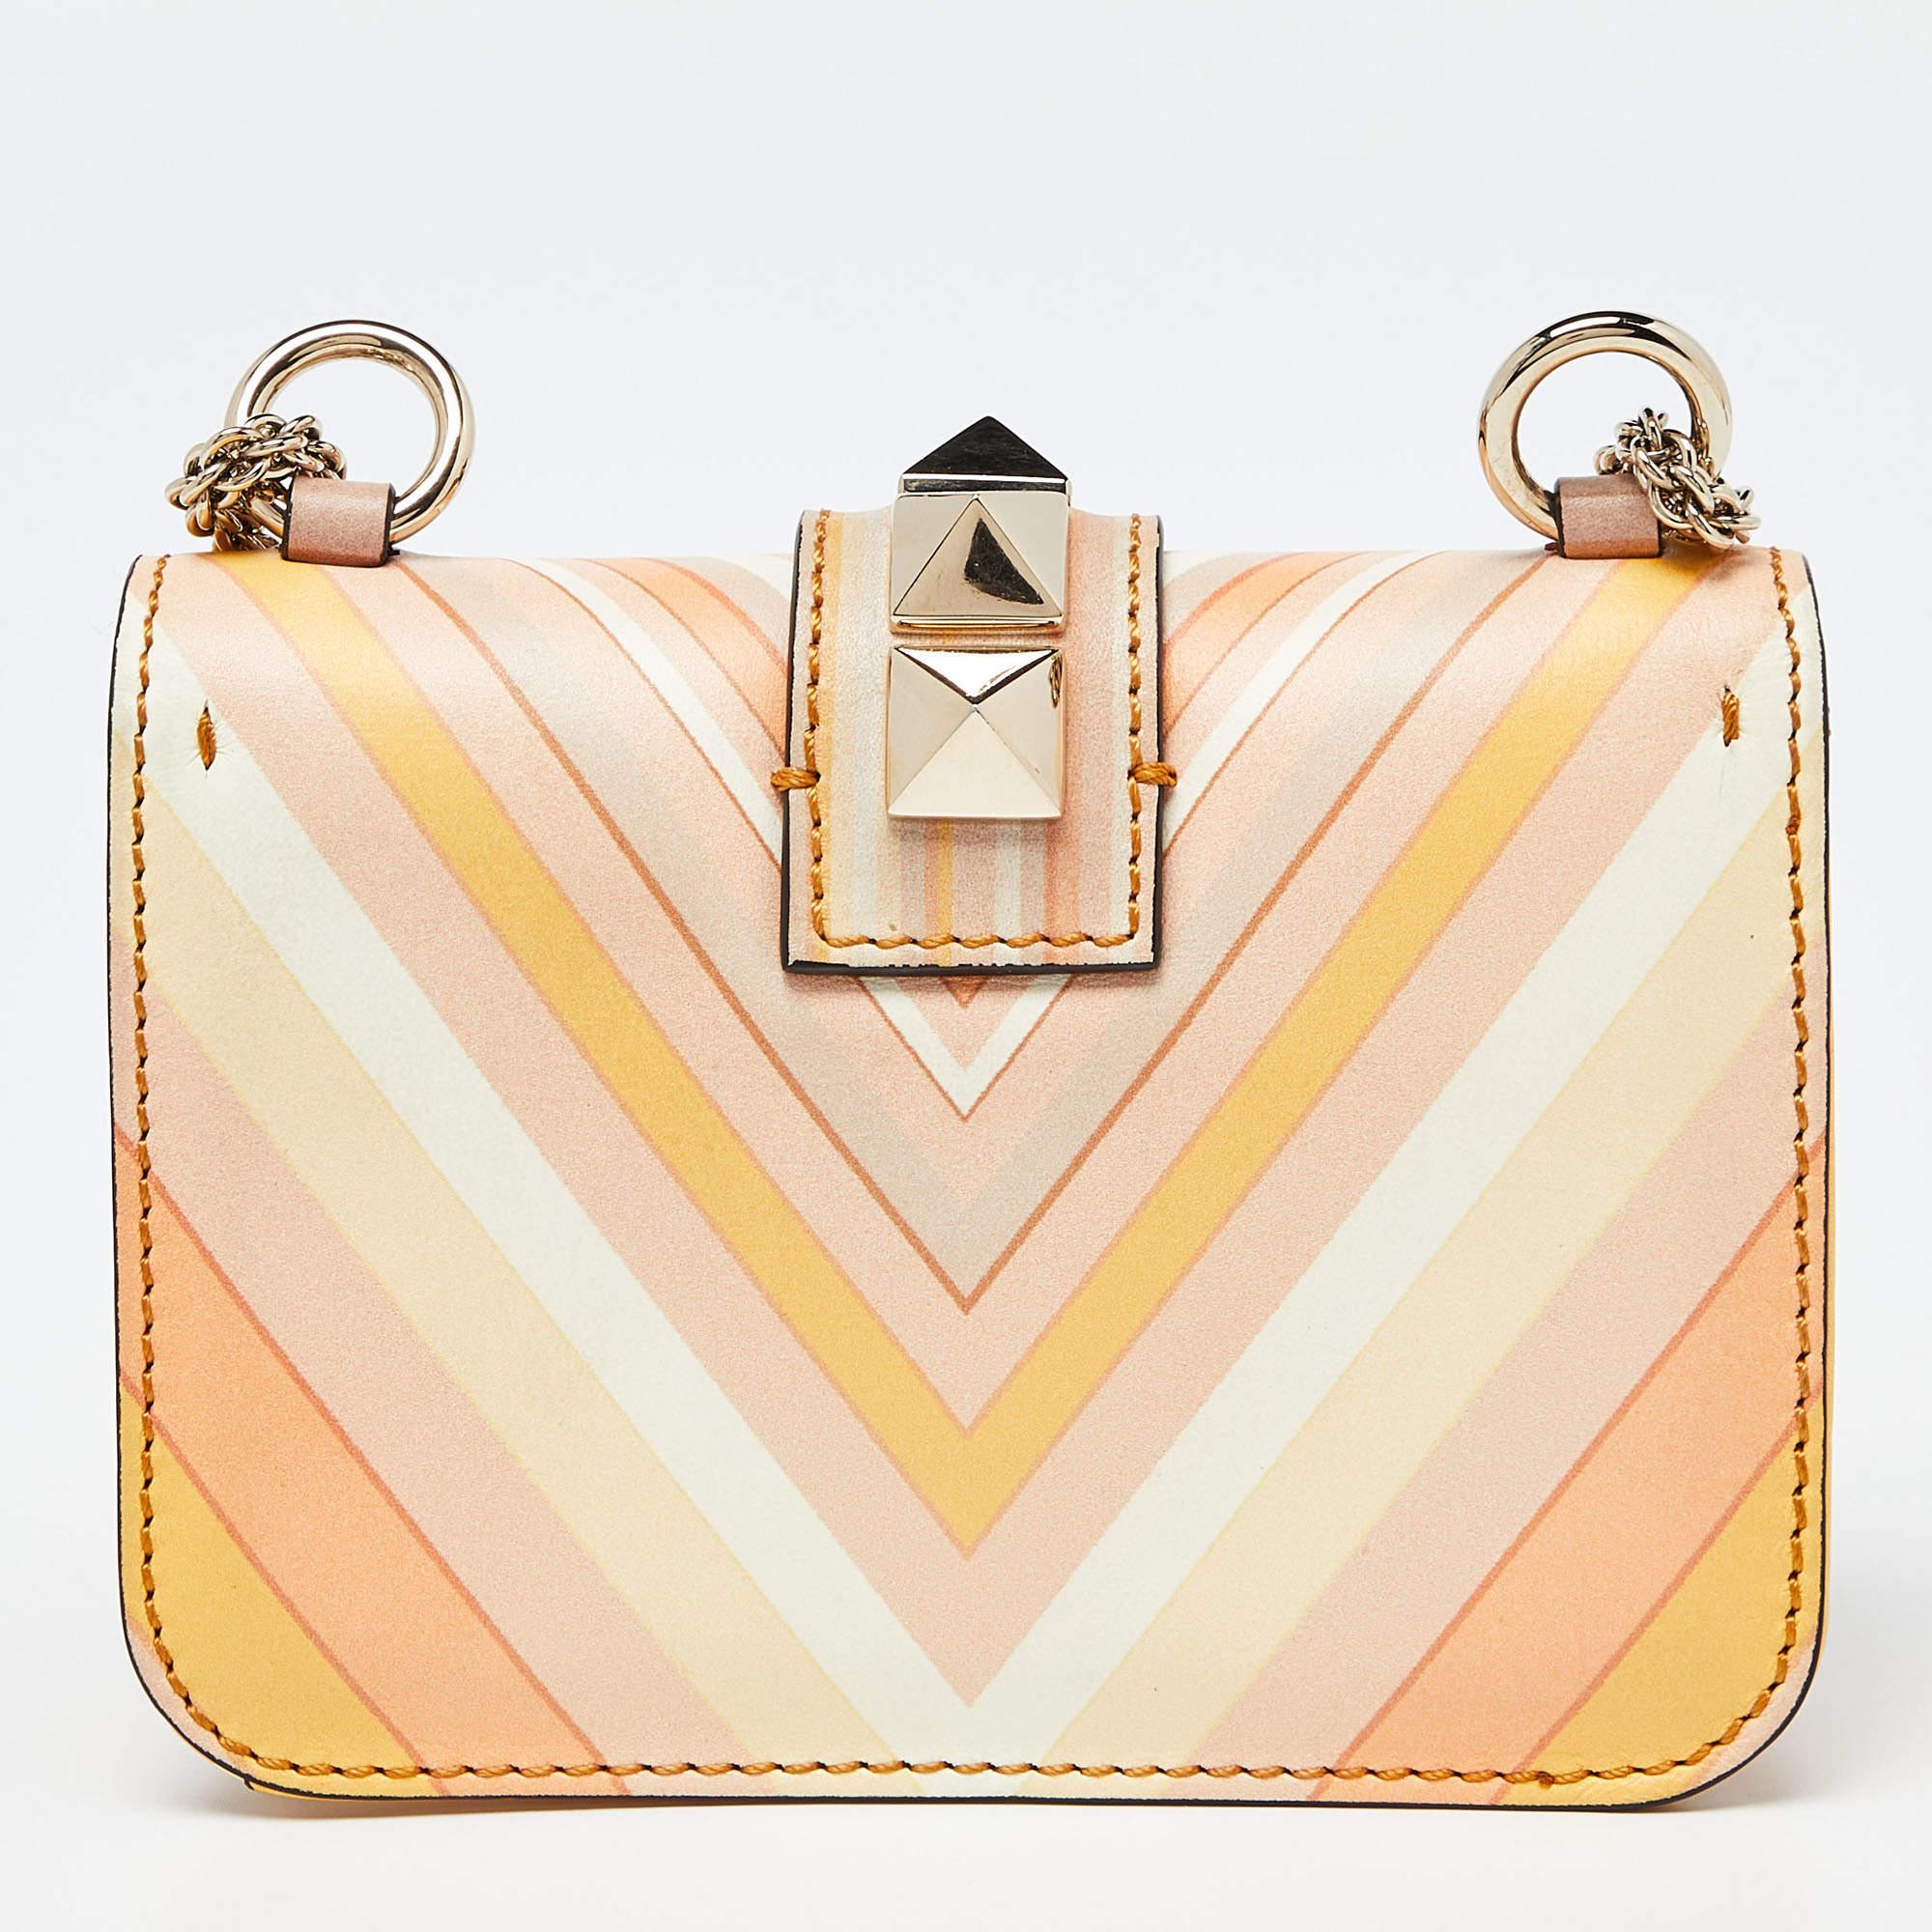 If you are looking for a bag with a blend of modern style and class, this Valentino creation is the answer. Crafted from leather, this multicolor piece comes with a gold-tone chain and a flap with a push-lock to secure the well-sized leather